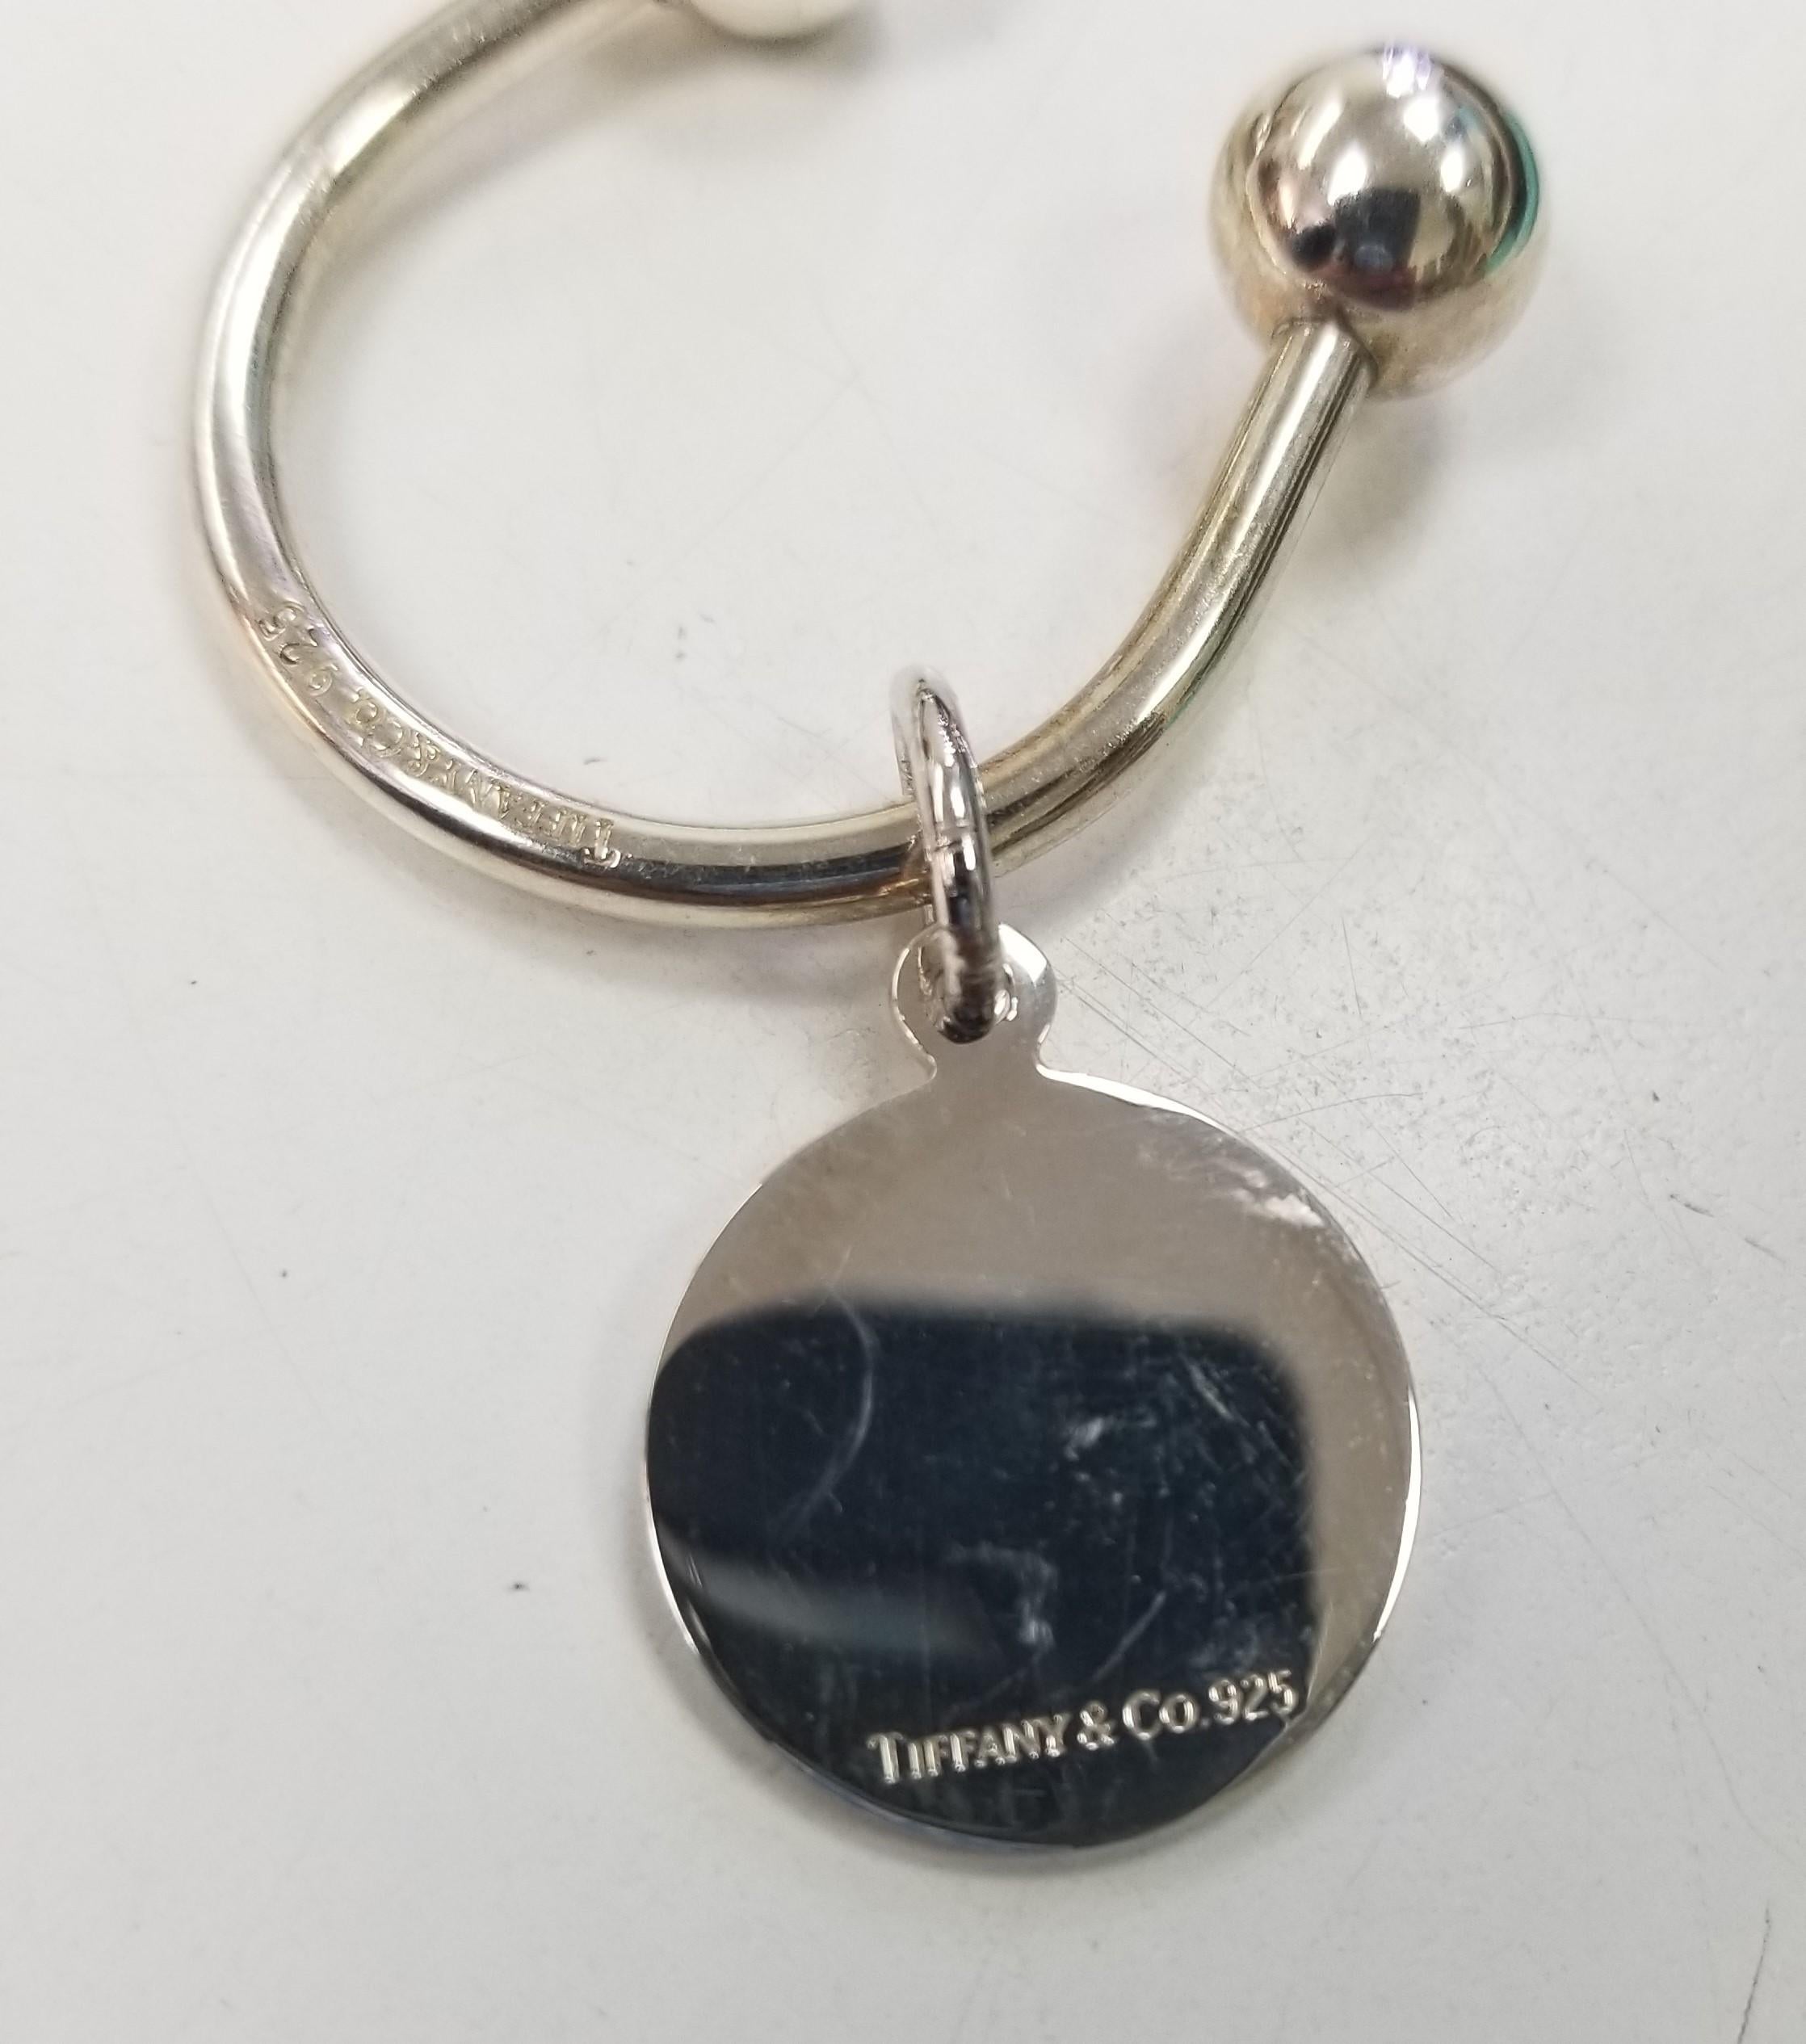 Tiffany & Co 'Return To Tiffany' Sterling Silver Key Ring In Excellent Condition For Sale In Los Angeles, CA